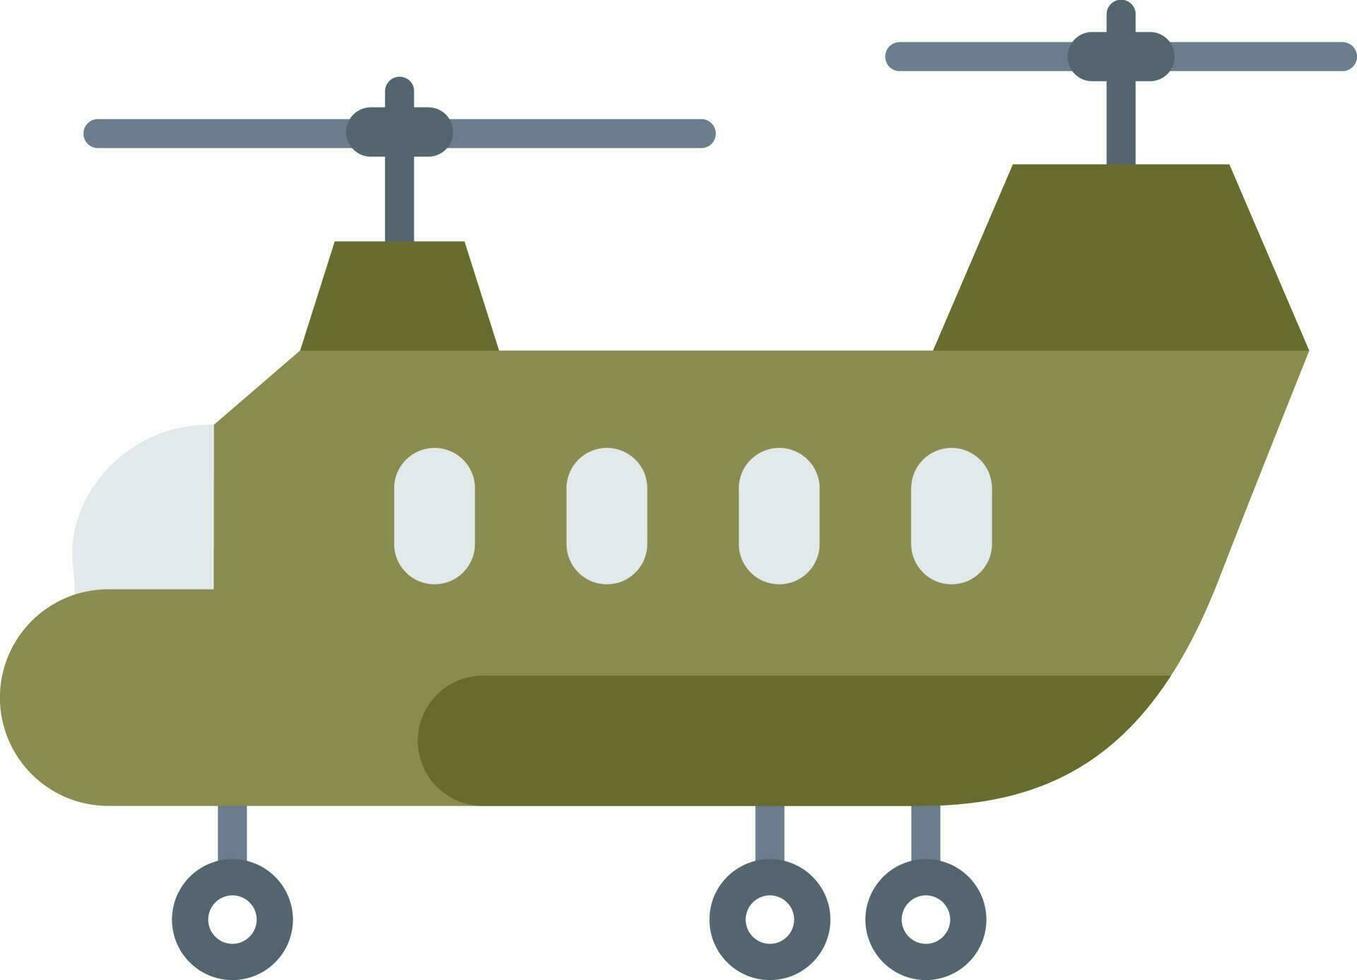 Army Helicopter icon vector image.